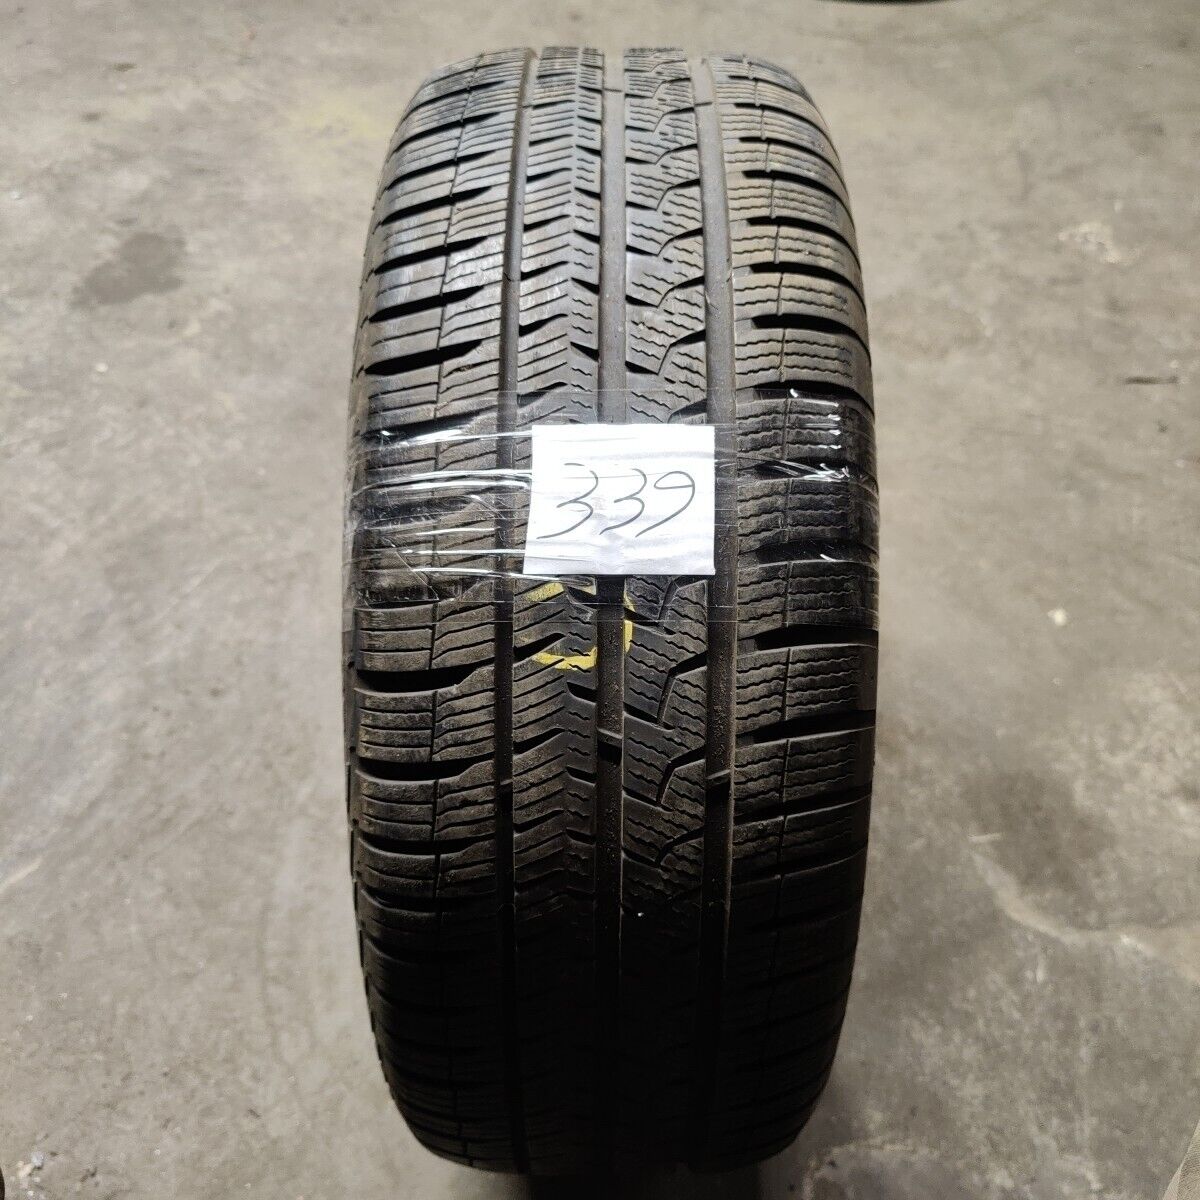 225/55 R16 Apollo Used 5.1mm (339)  free fit available